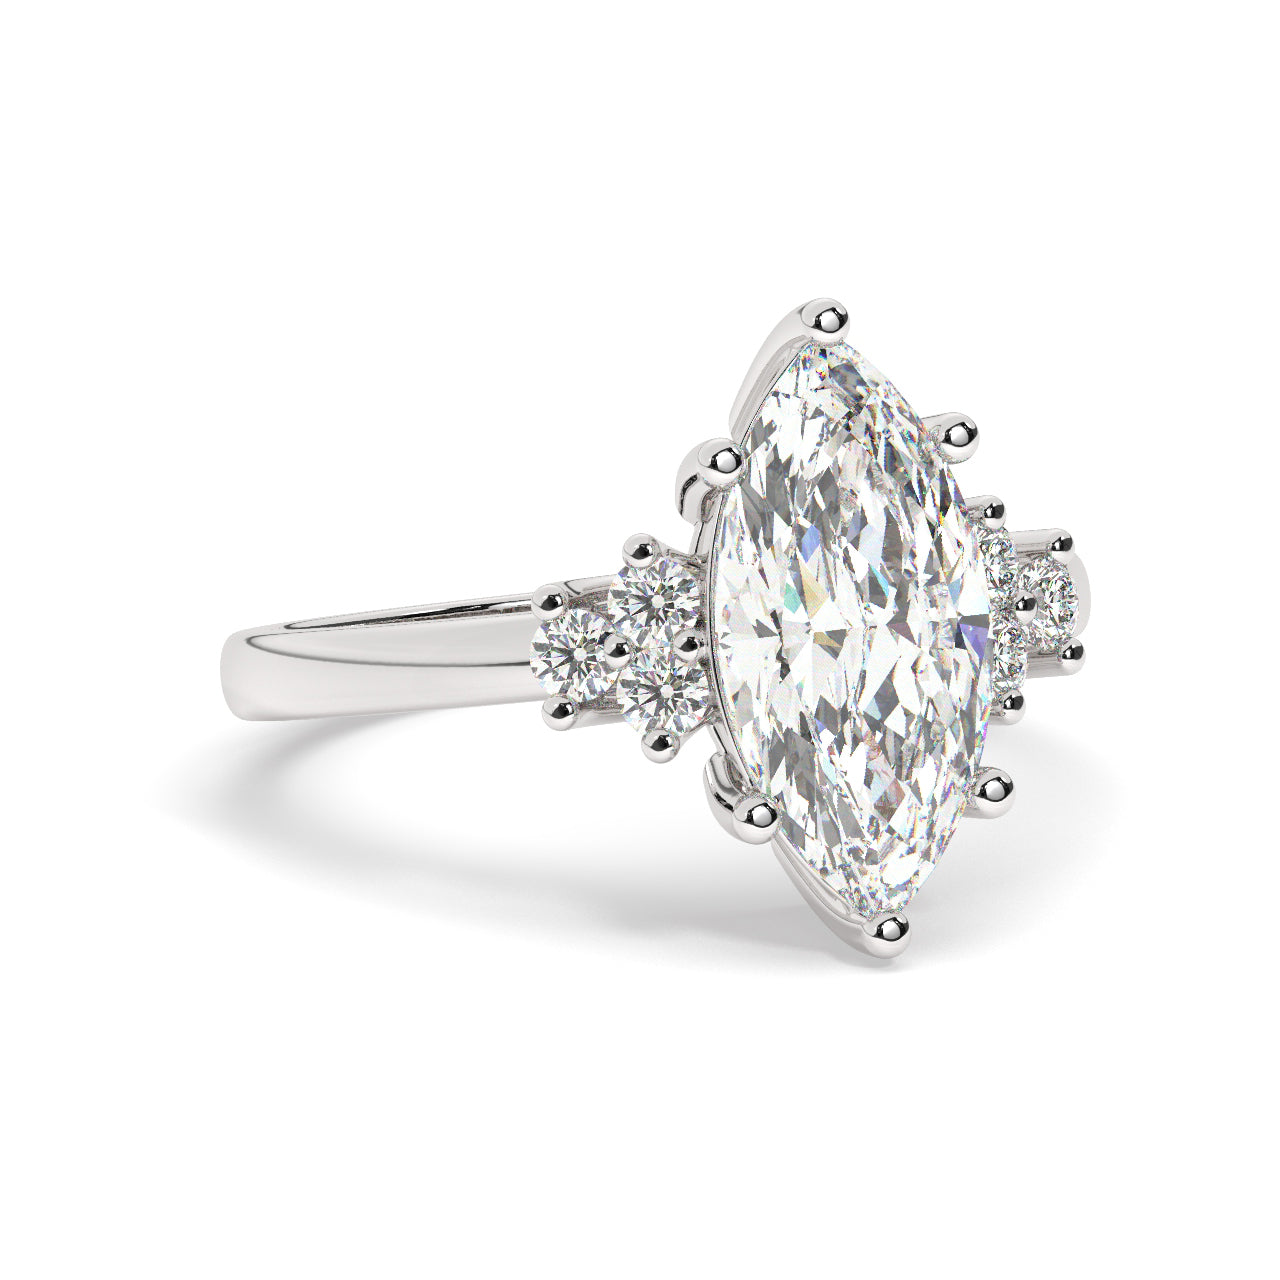 White Gold Marquis Cut Engagement Ring Accompanied by Round Stones - Rotated View